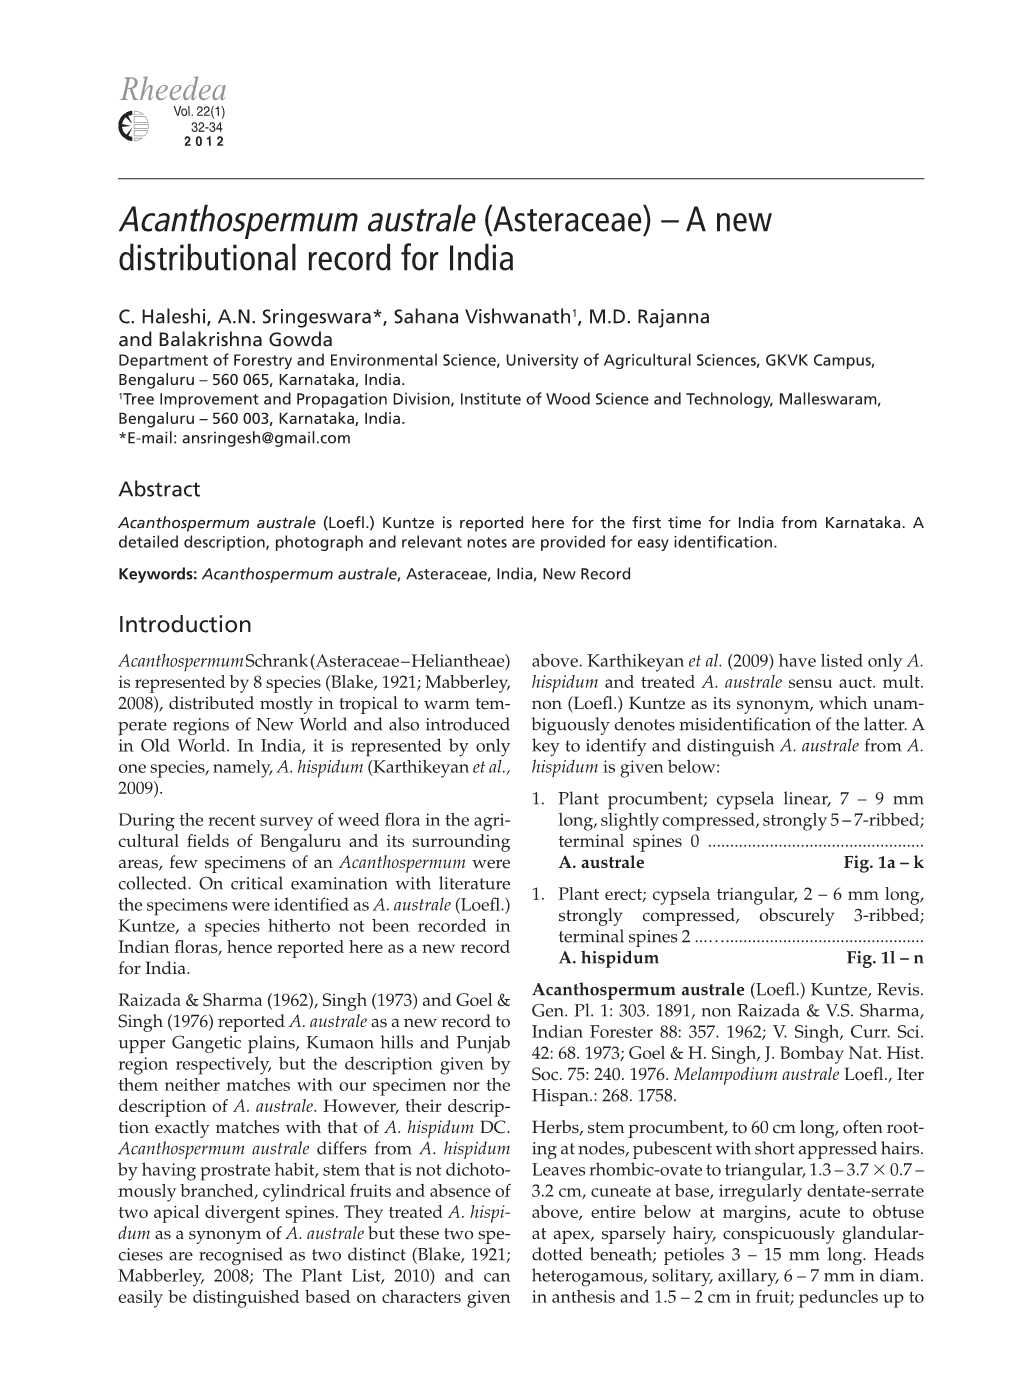 Acanthospermum Australe (Asteraceae) – a New Distributional Record for India